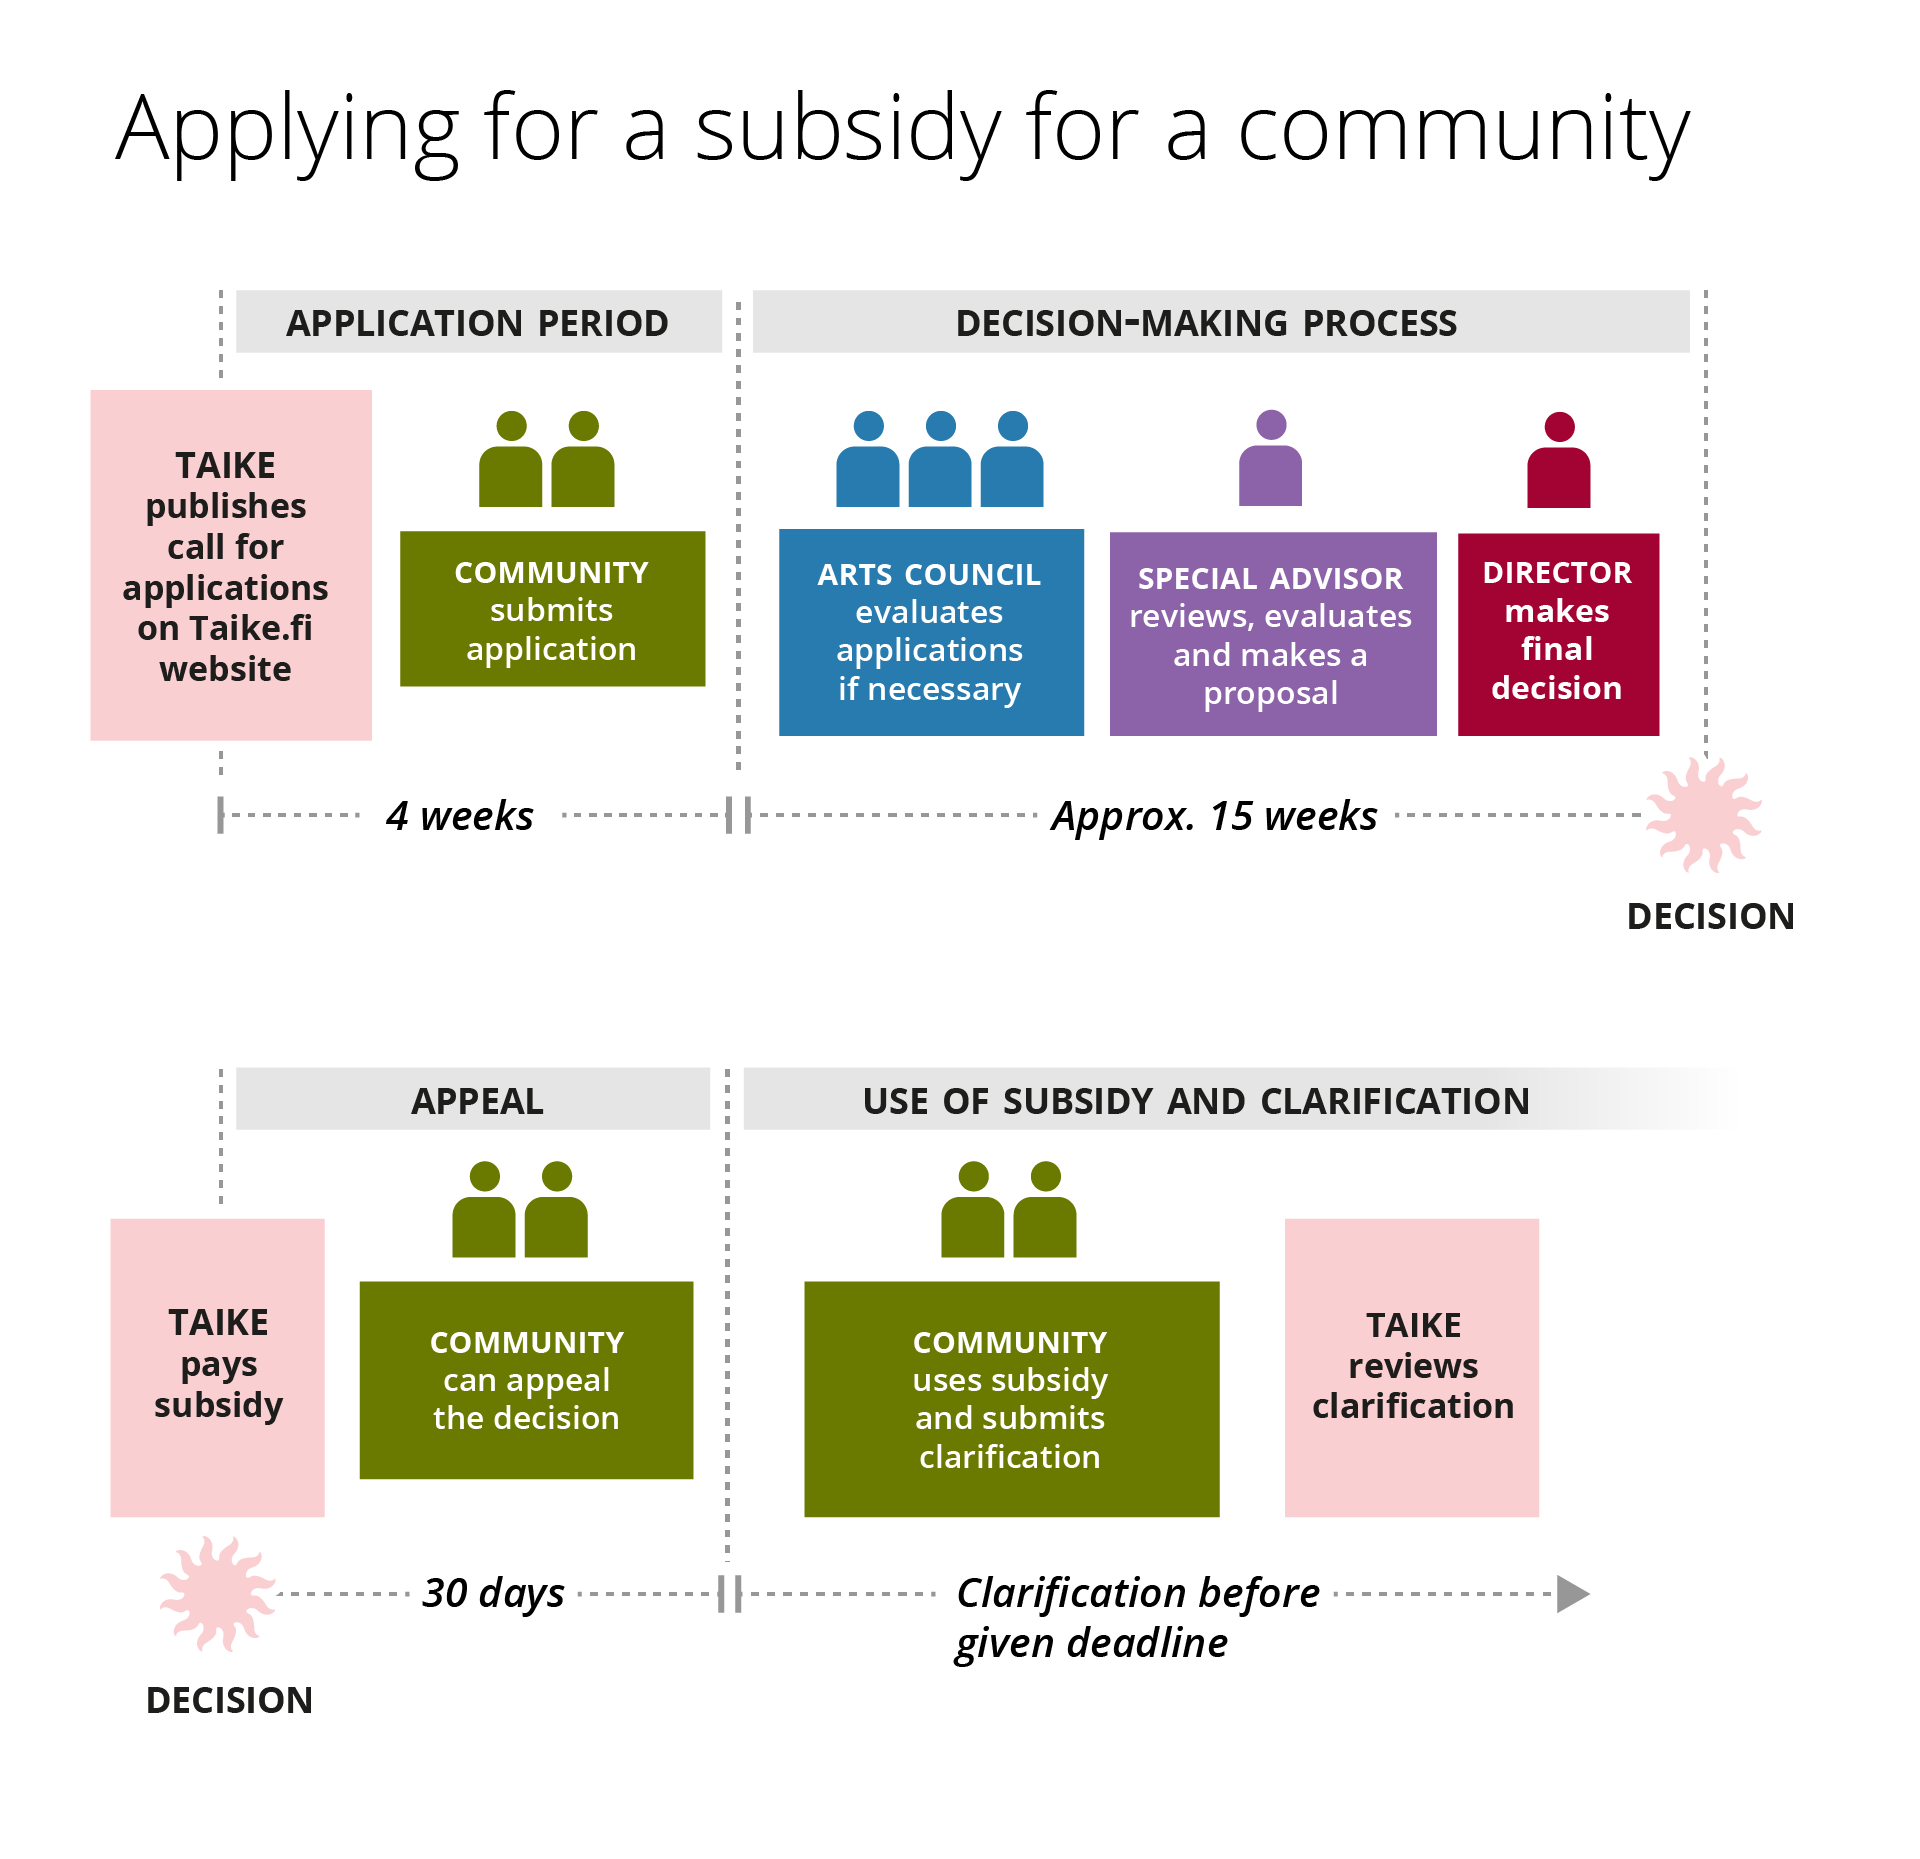 Applying for a subsidy for a community